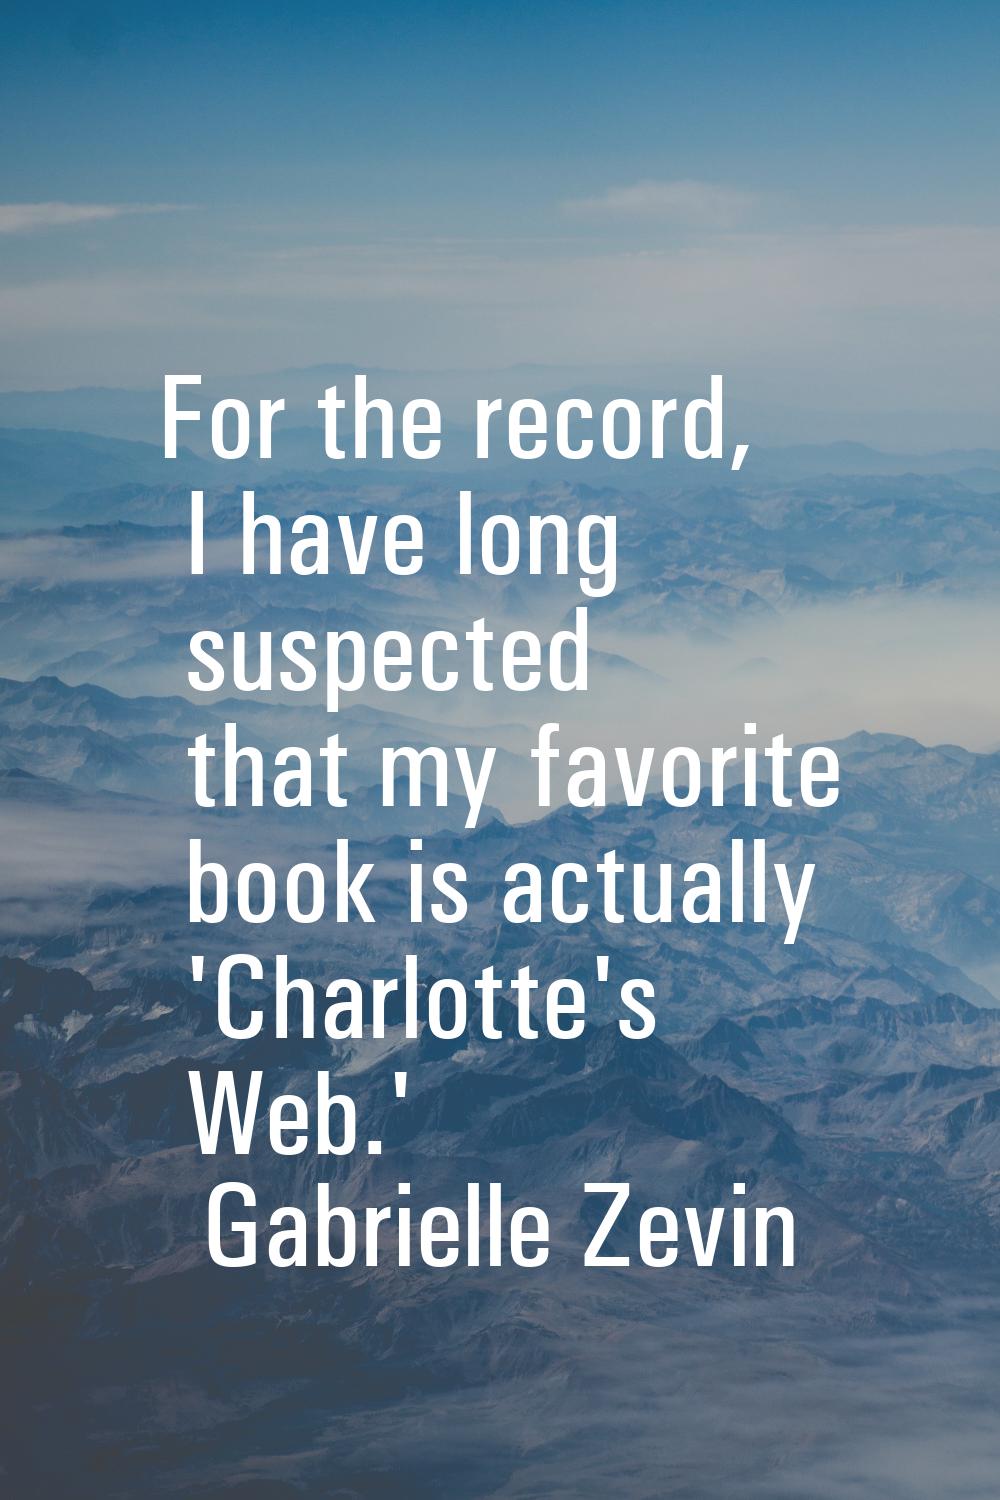 For the record, I have long suspected that my favorite book is actually 'Charlotte's Web.'